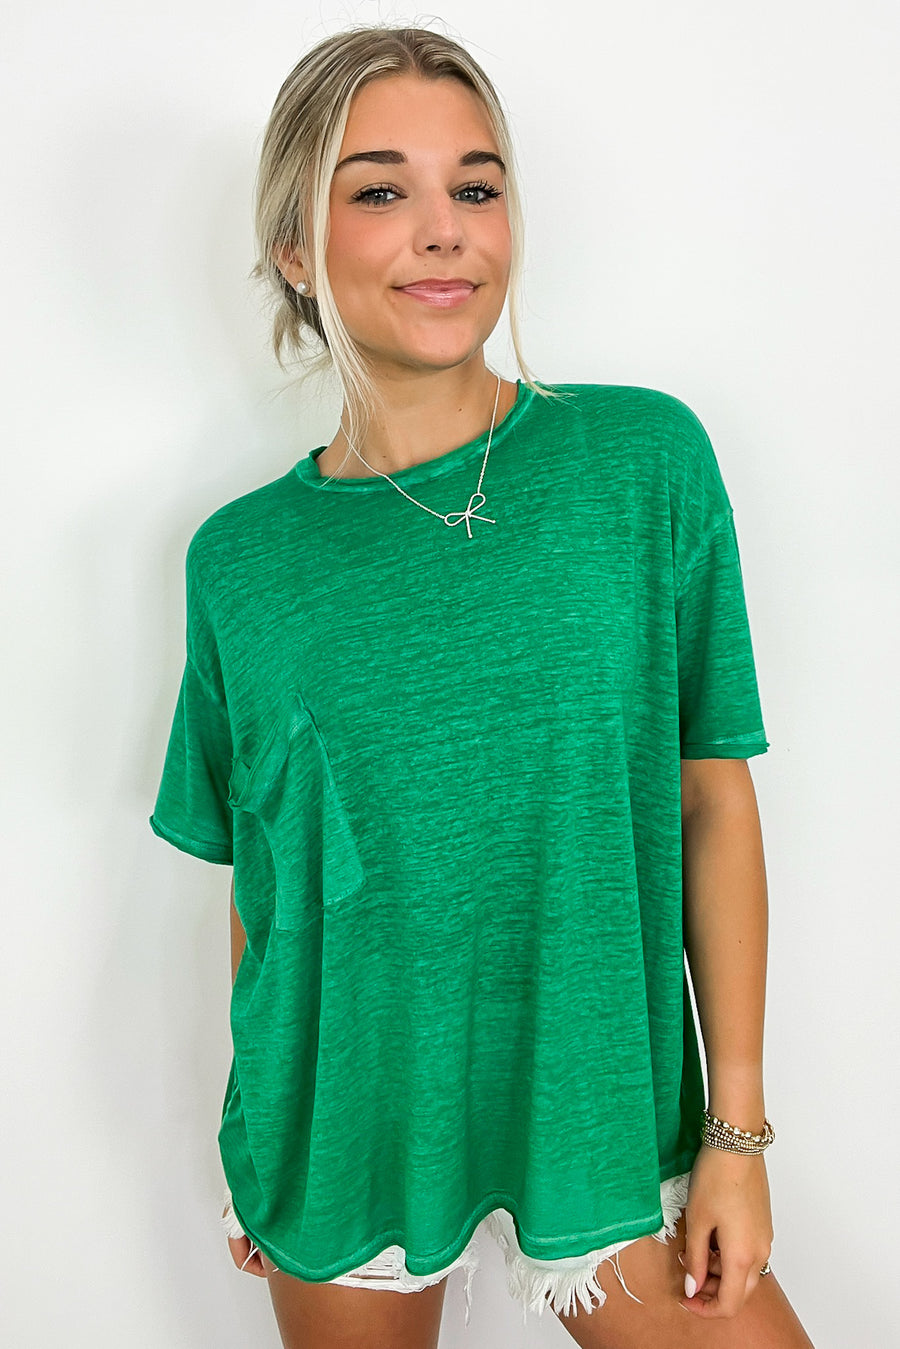 Kelly Green / SM Marisol Burnout Wash Oversized Pocket Top - Madison and Mallory